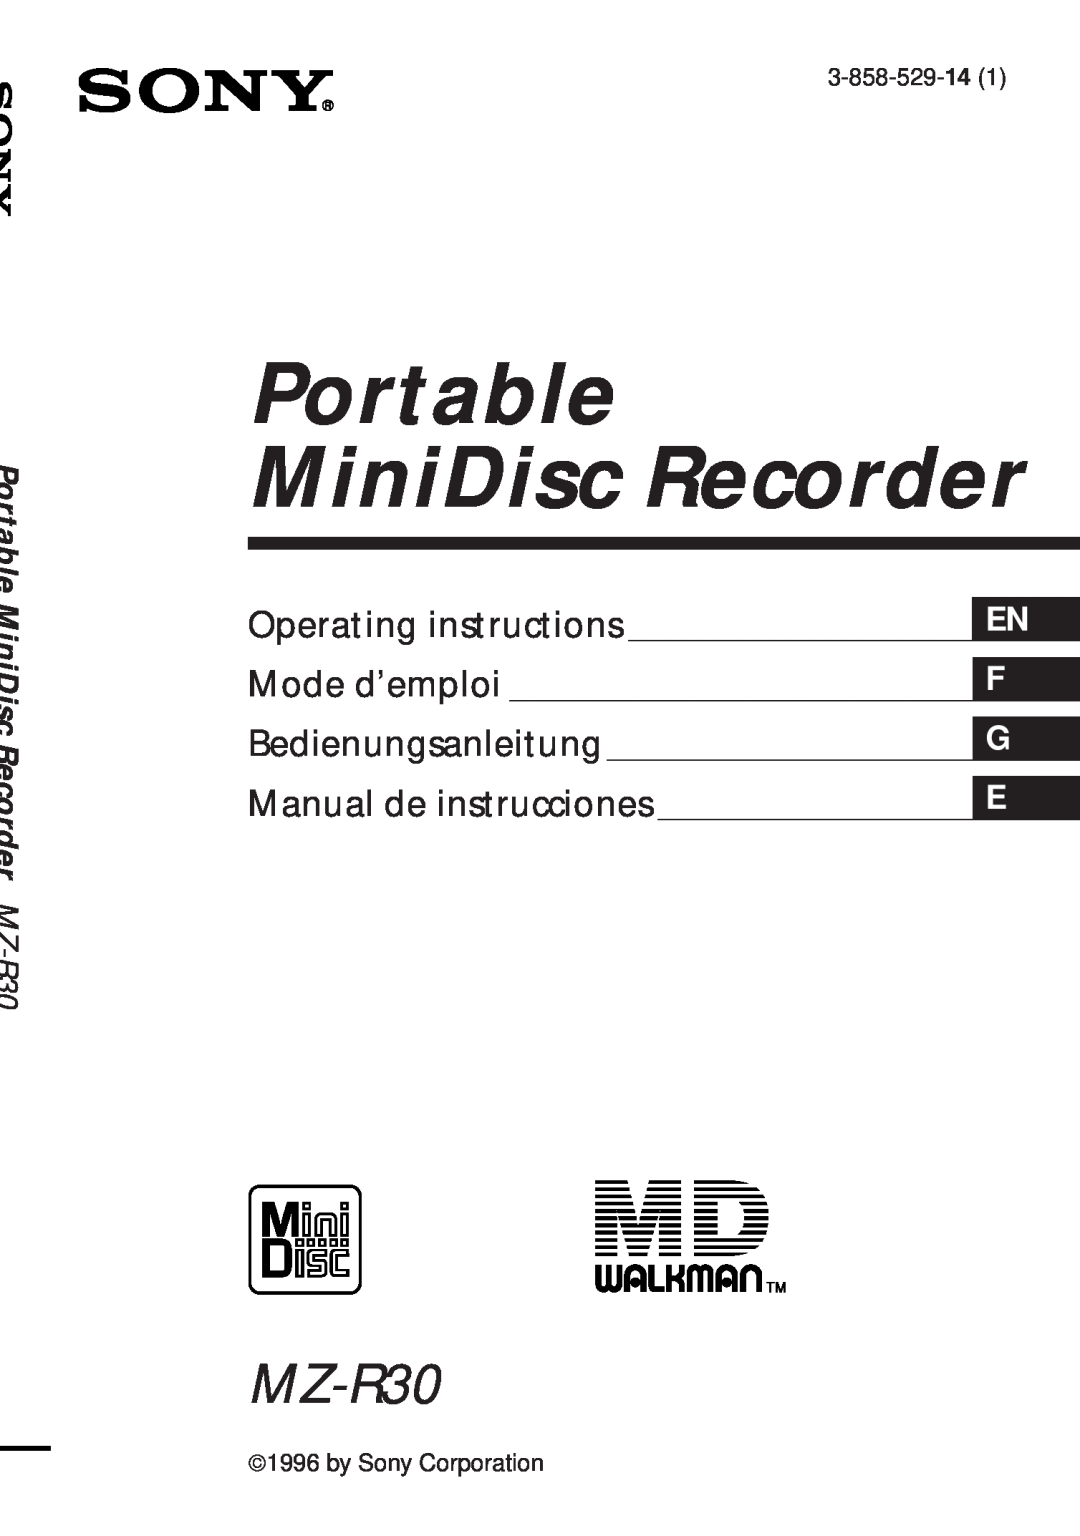 Sony MZ-R30 operating instructions Portable MiniDisc Recorder, Operating instructions, Mode d’emploi, Bedienungsanleitung 